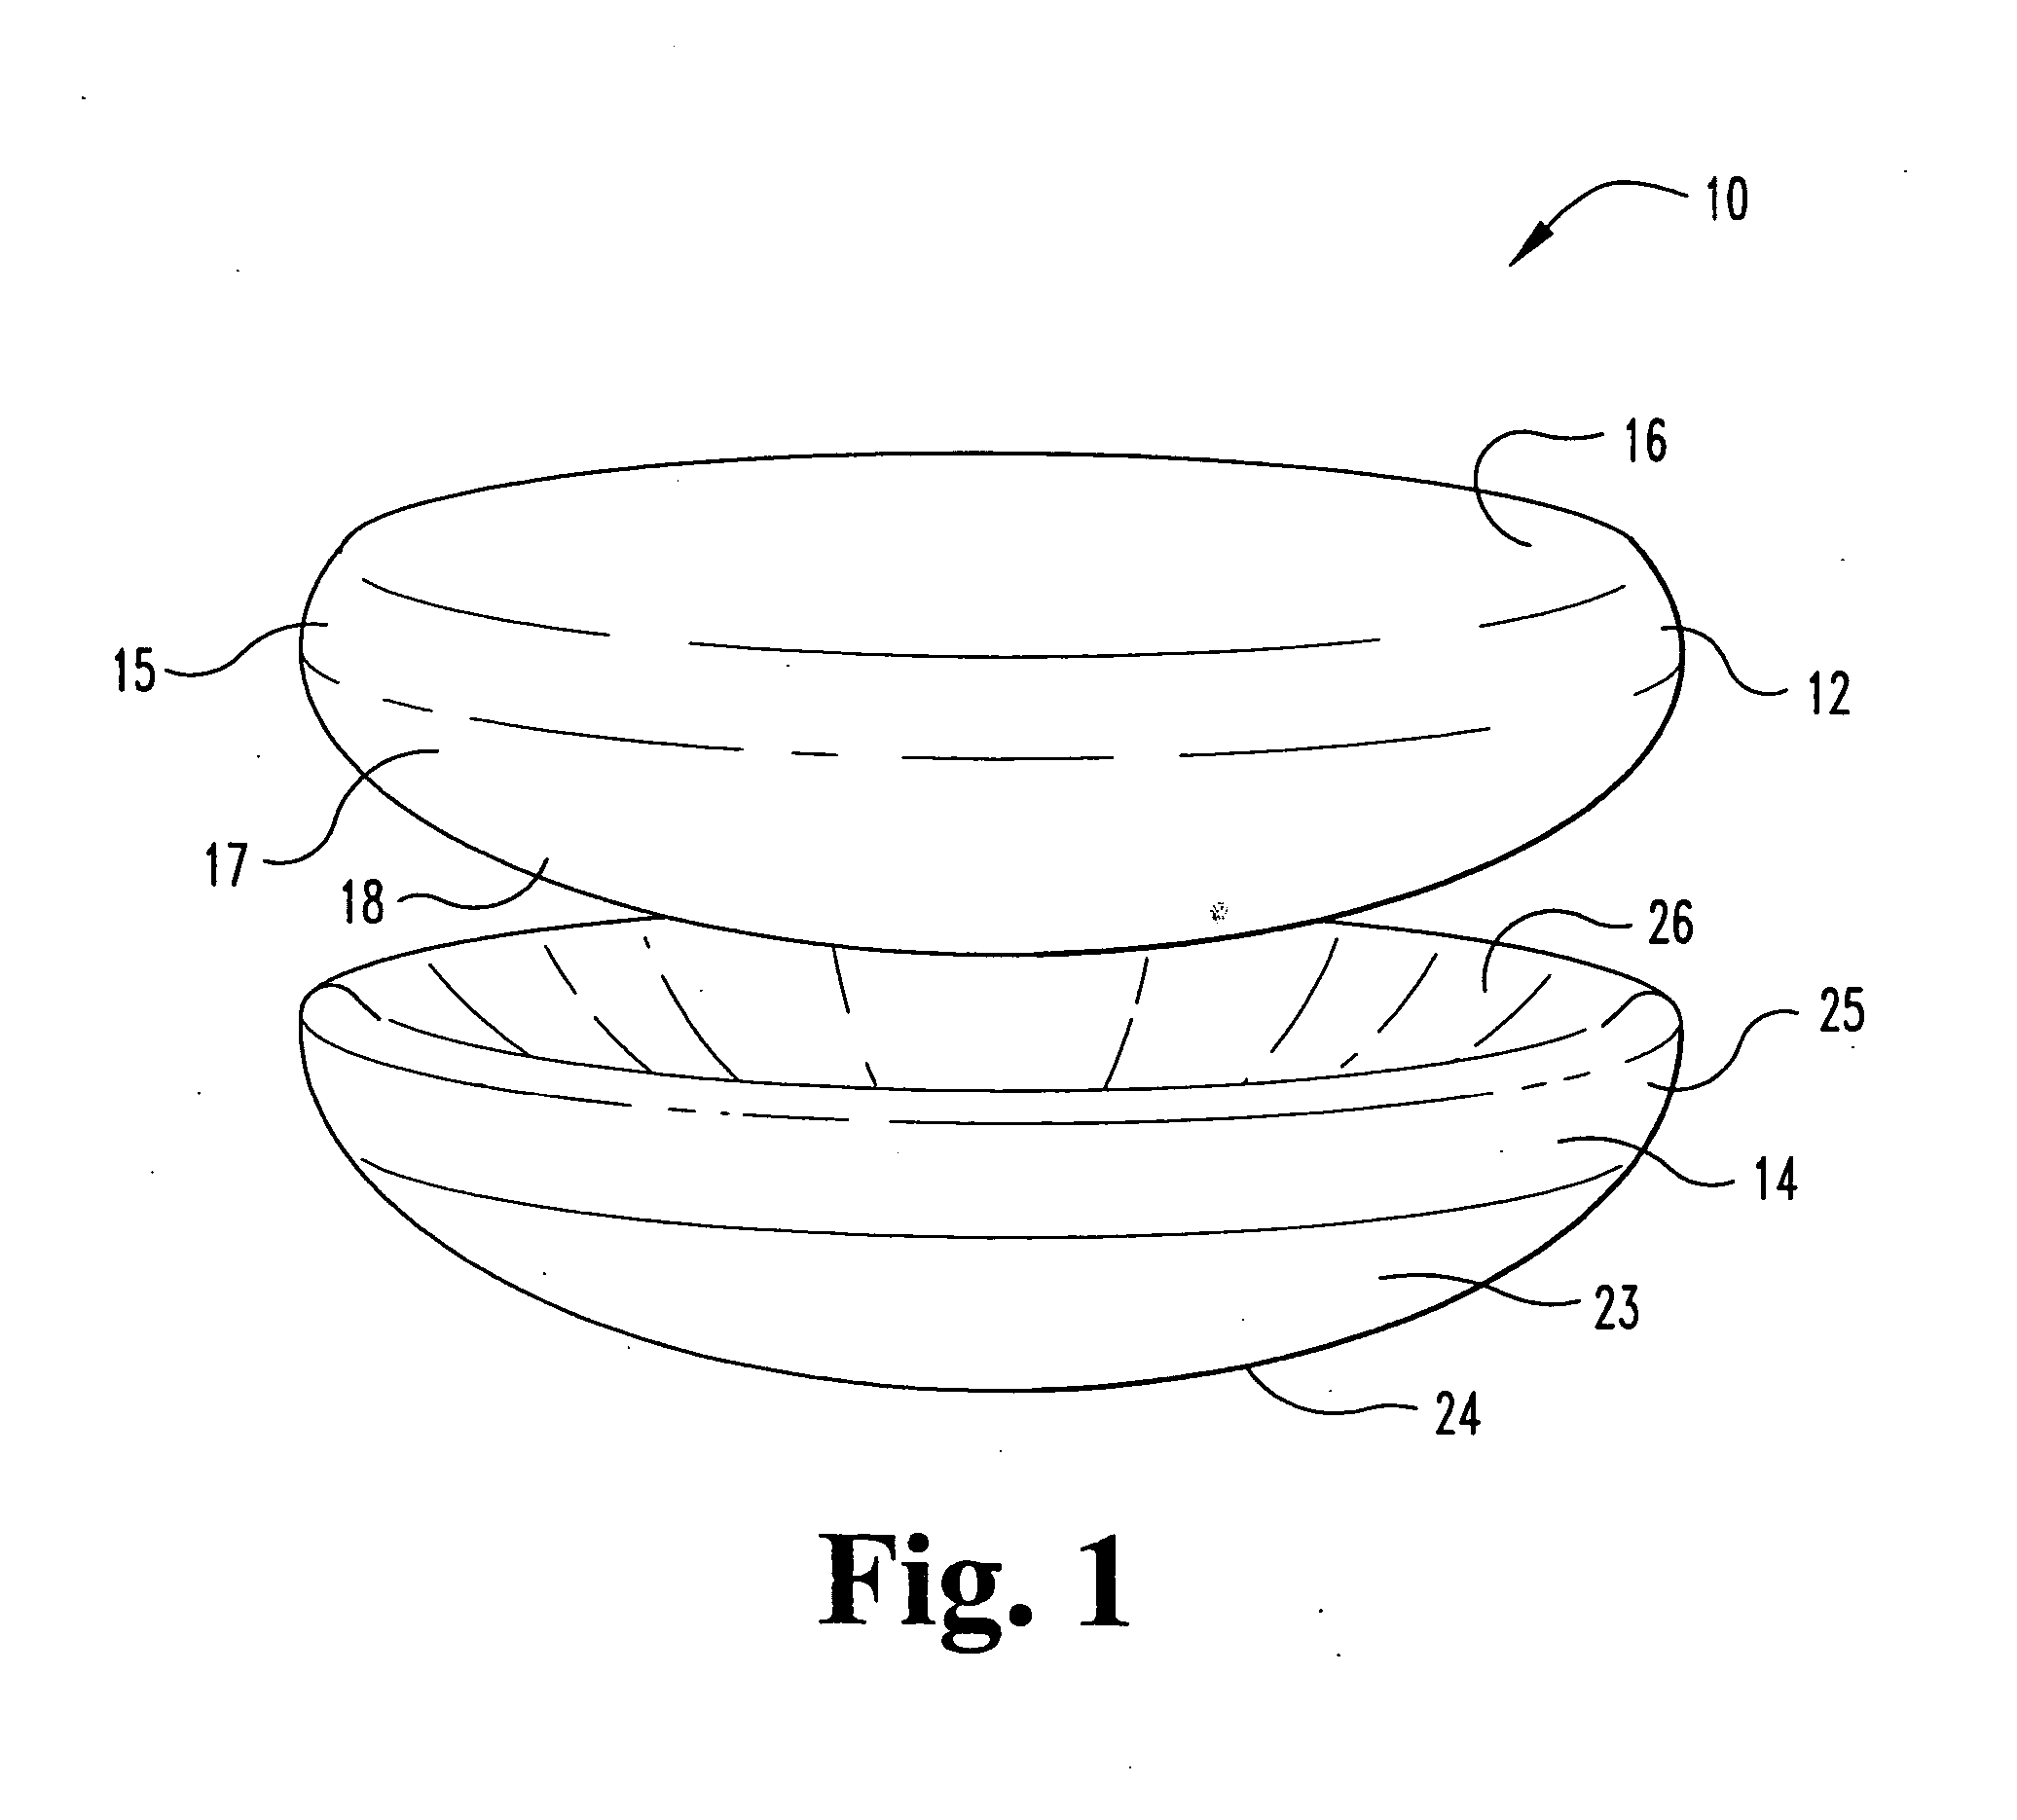 Implants based on engineered composite materials having enhanced imaging and wear resistance